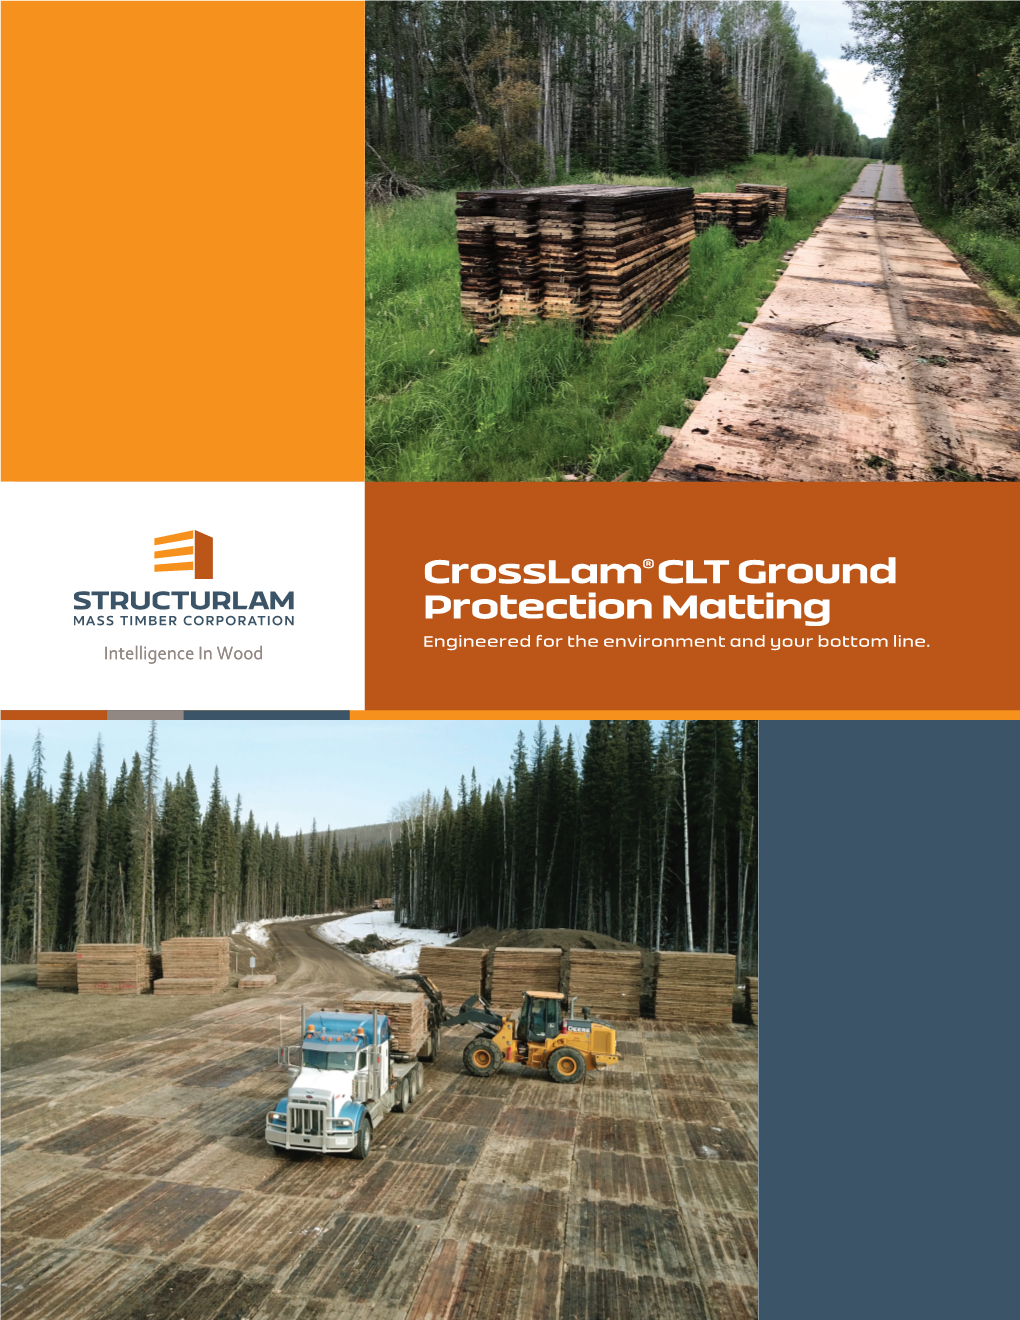 Crosslam® CLT Ground Protection Matting Engineered for the Environment and Your Bottom Line